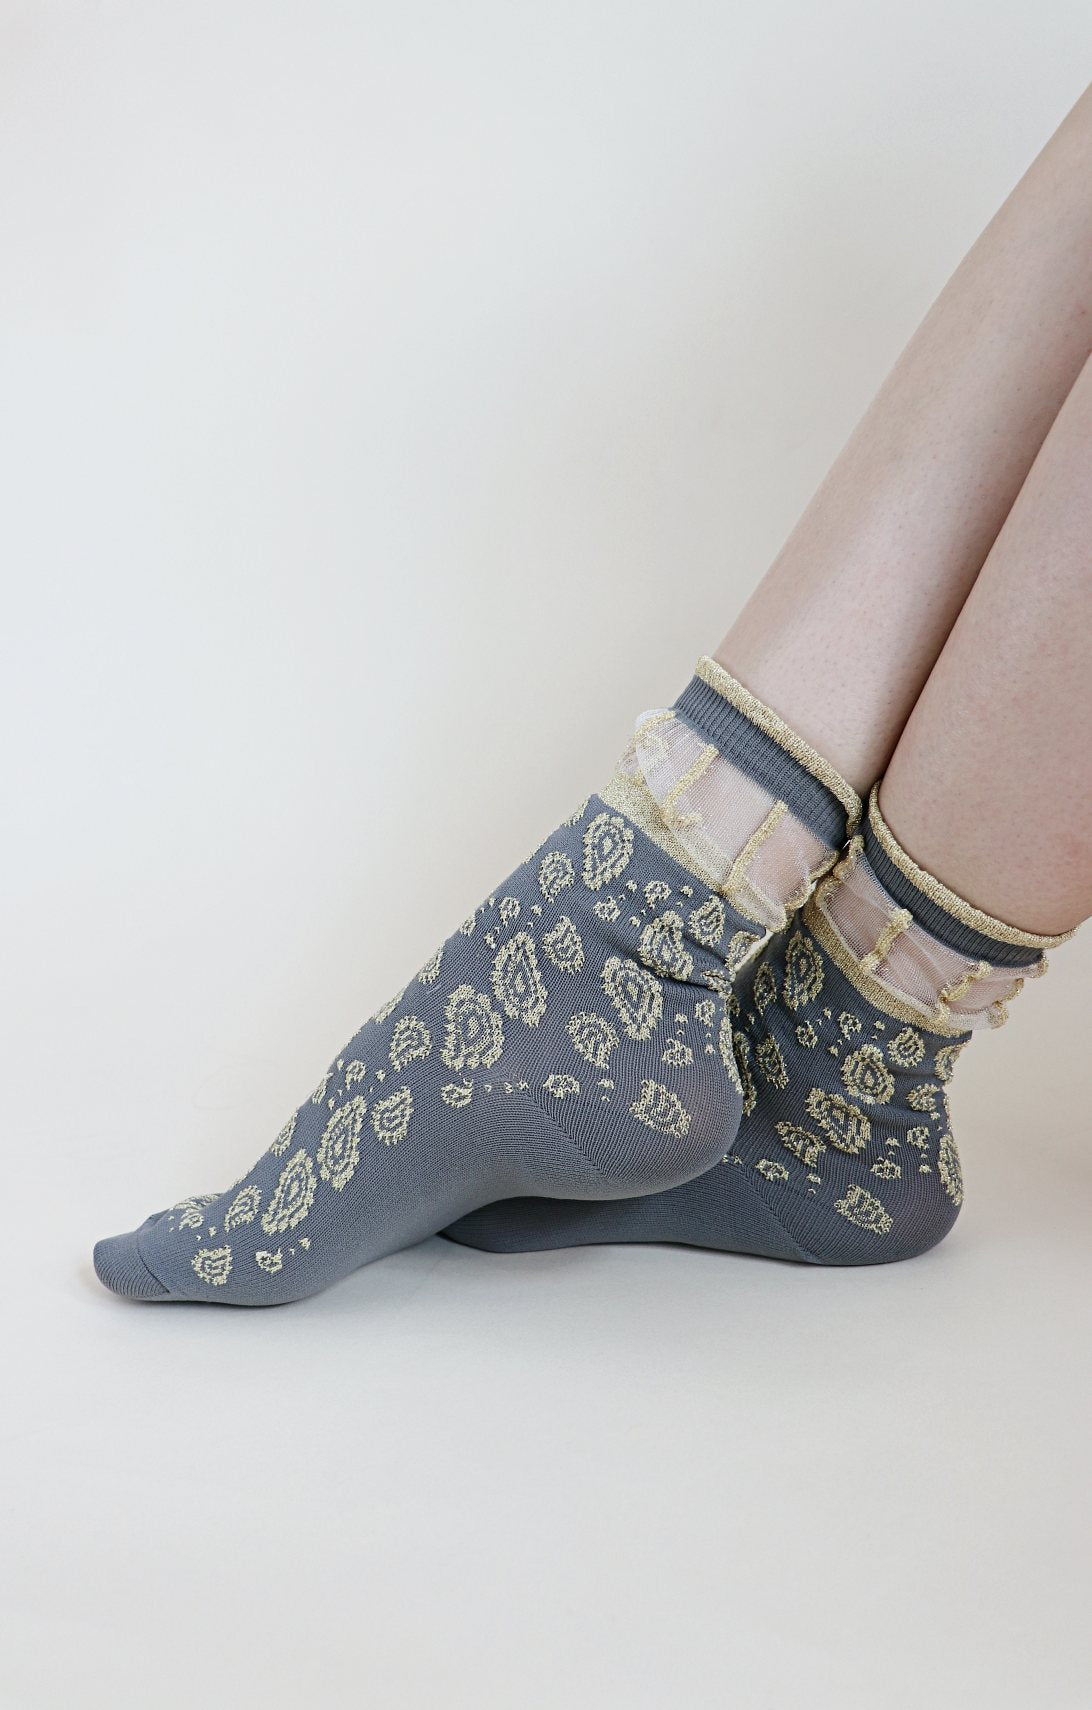 TABBISOCKS brand Golden Paisley Socks in MIDDLE GREY color with gold Persian-like pattern embroidery